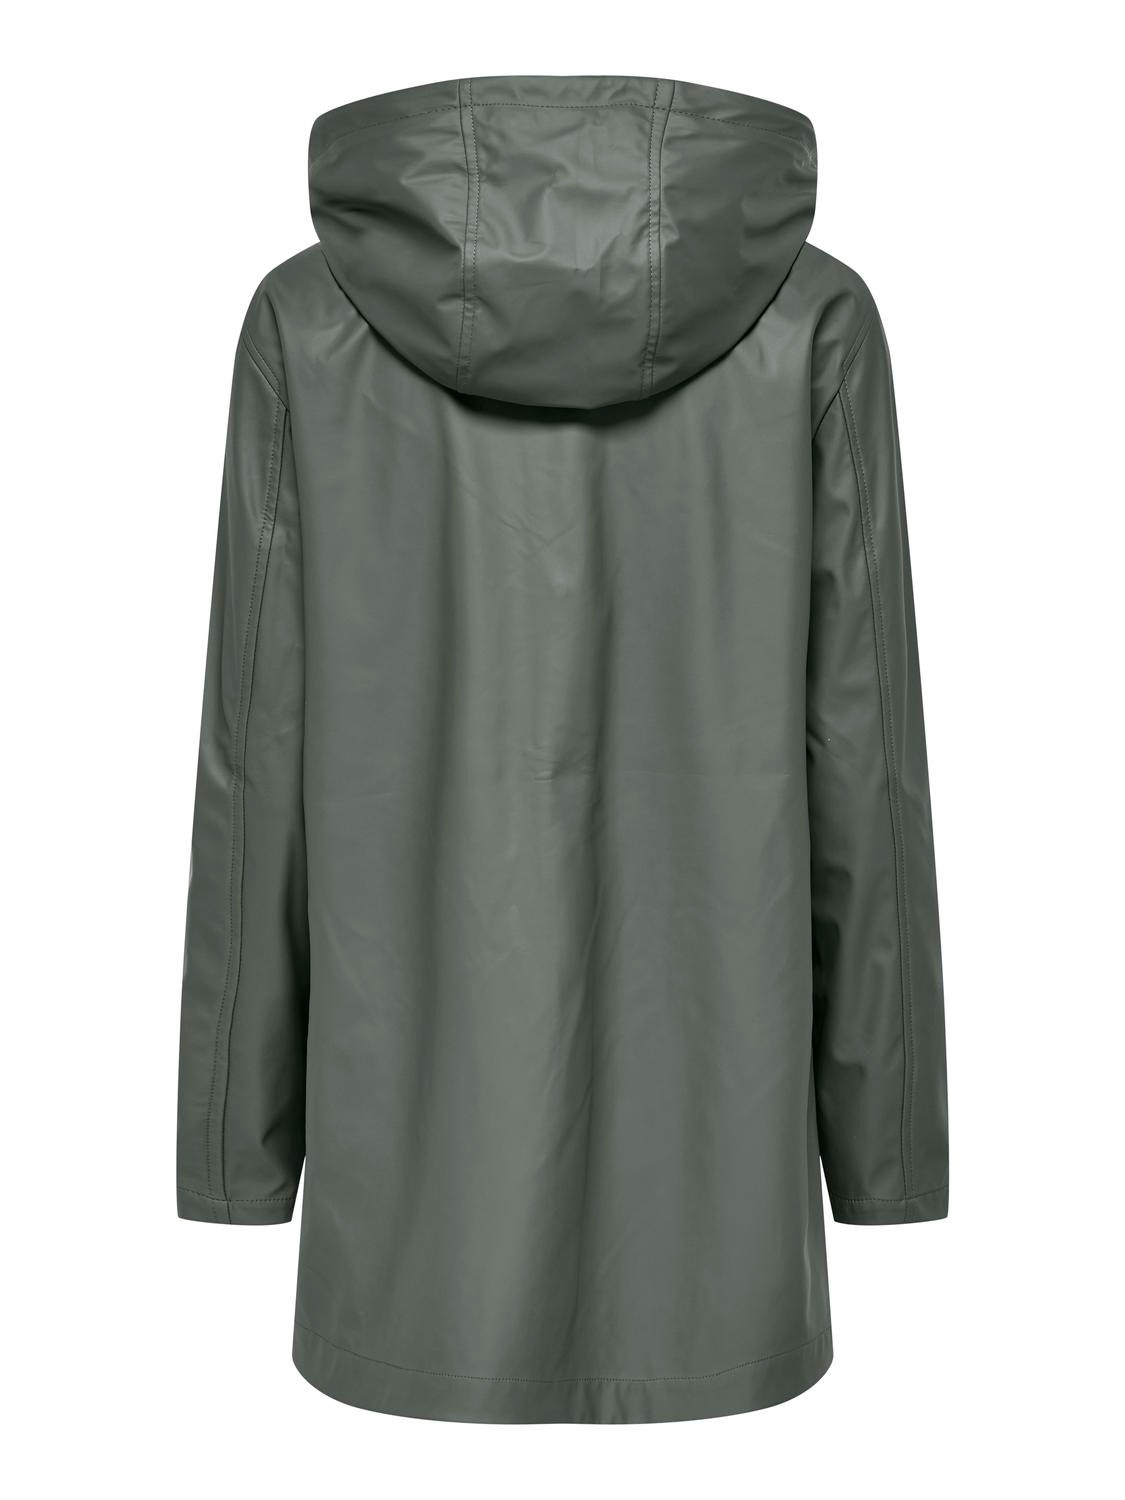 ONLY Solid Colored Rain jacket -Agave Green - 15261734